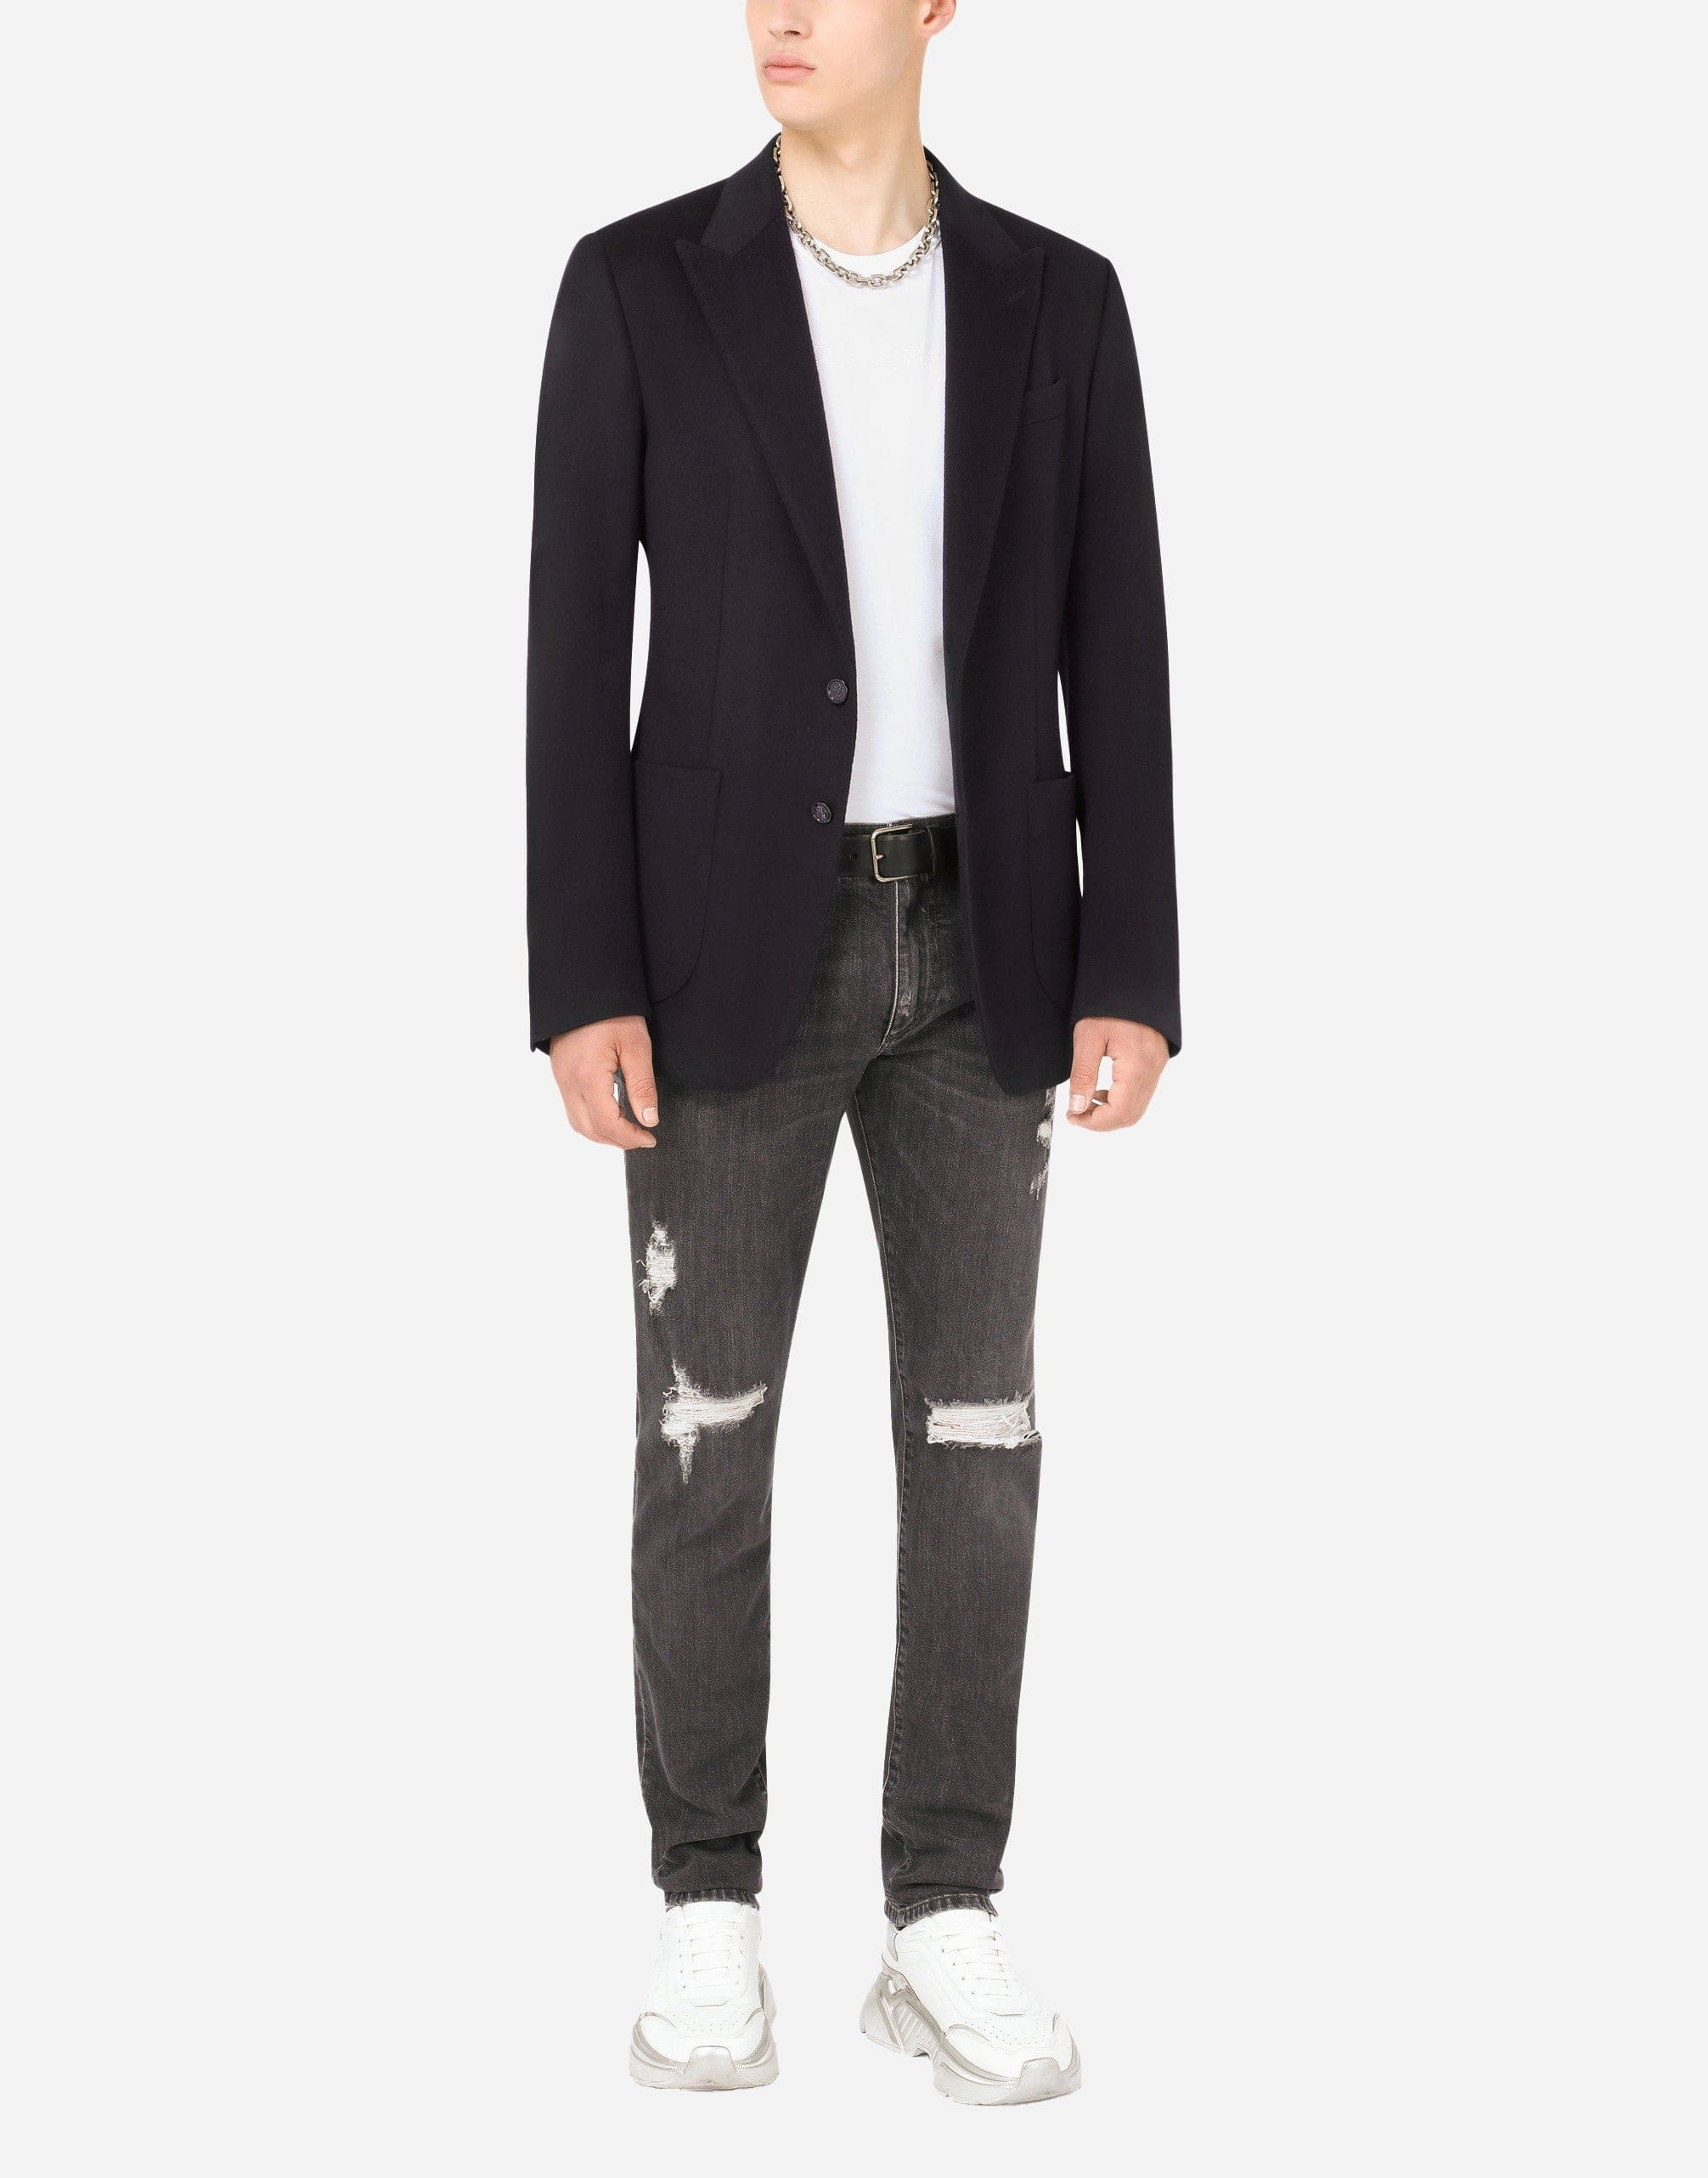 Dolce & Gabbana Slim-Fit Cotton Jeans With Rips